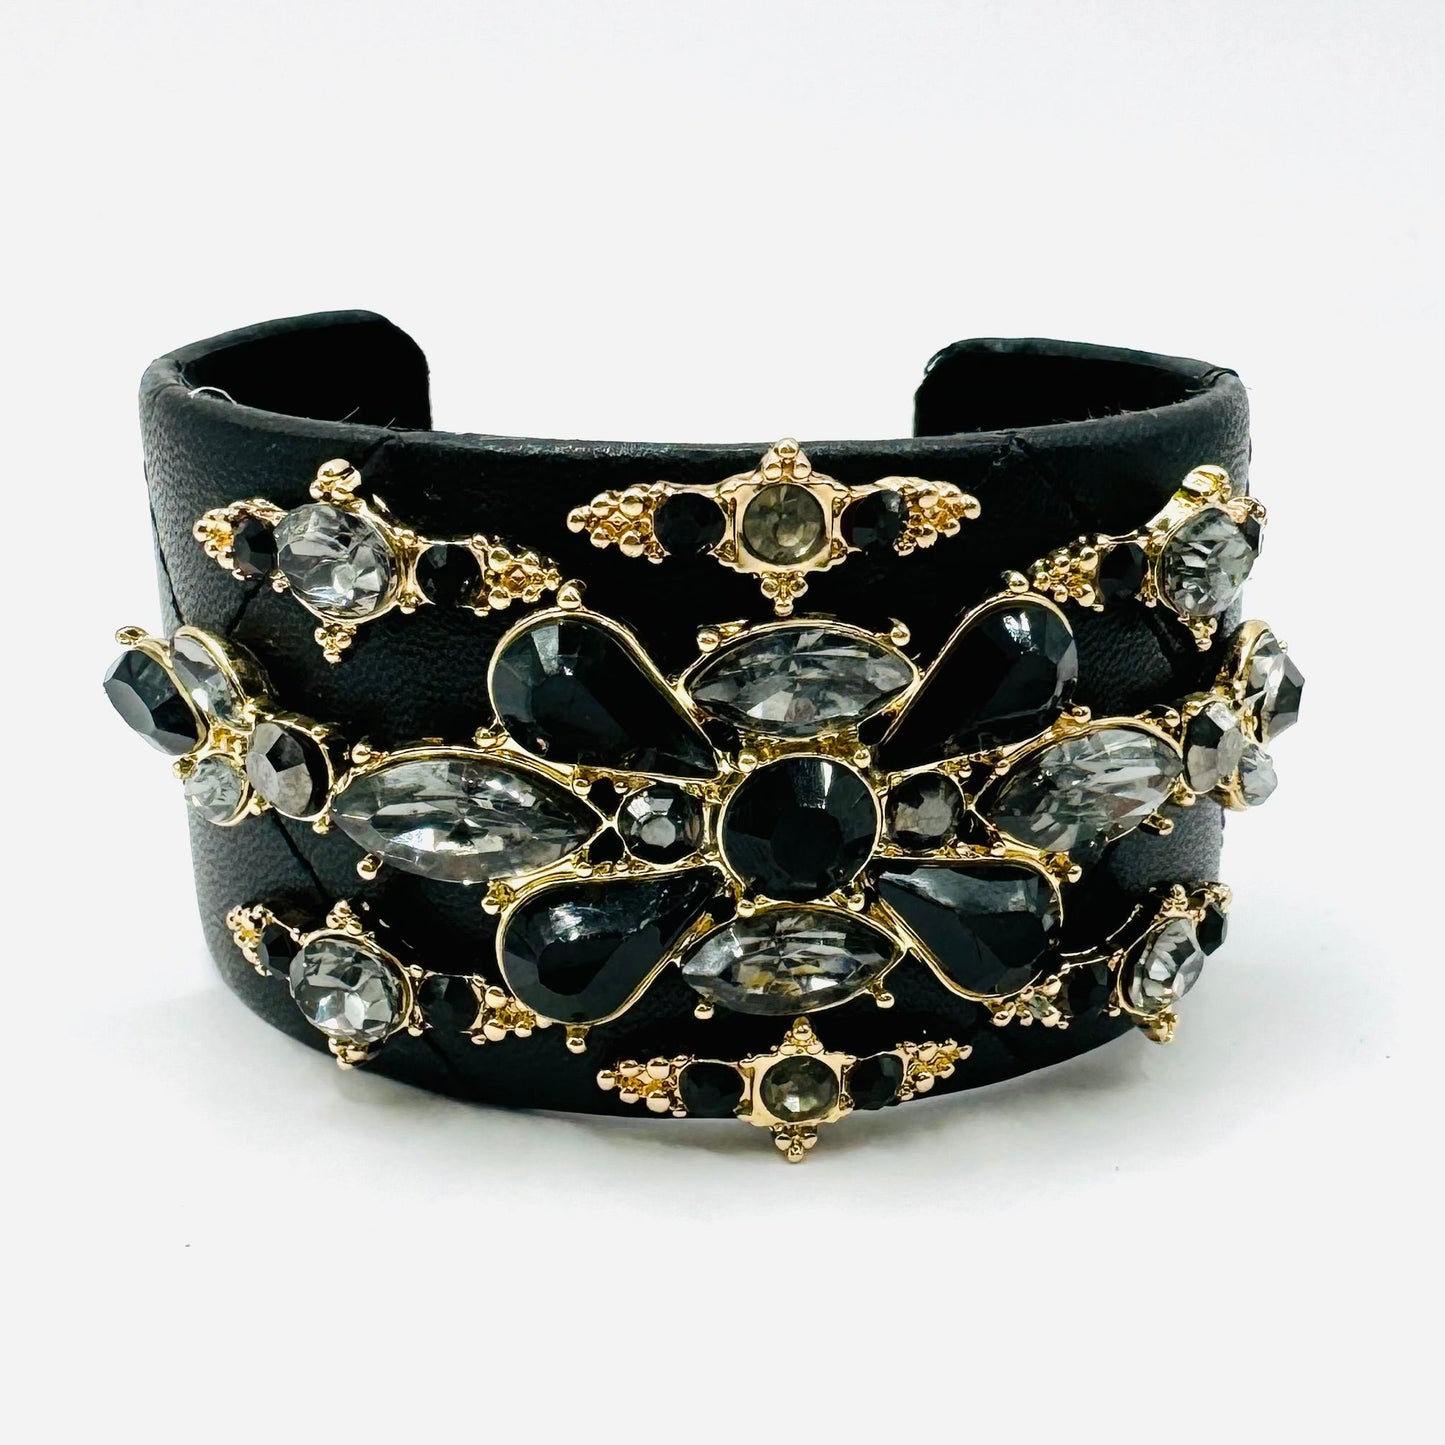 Cuffed In Style Bracelets - House of FaSHUN by Shun Melson